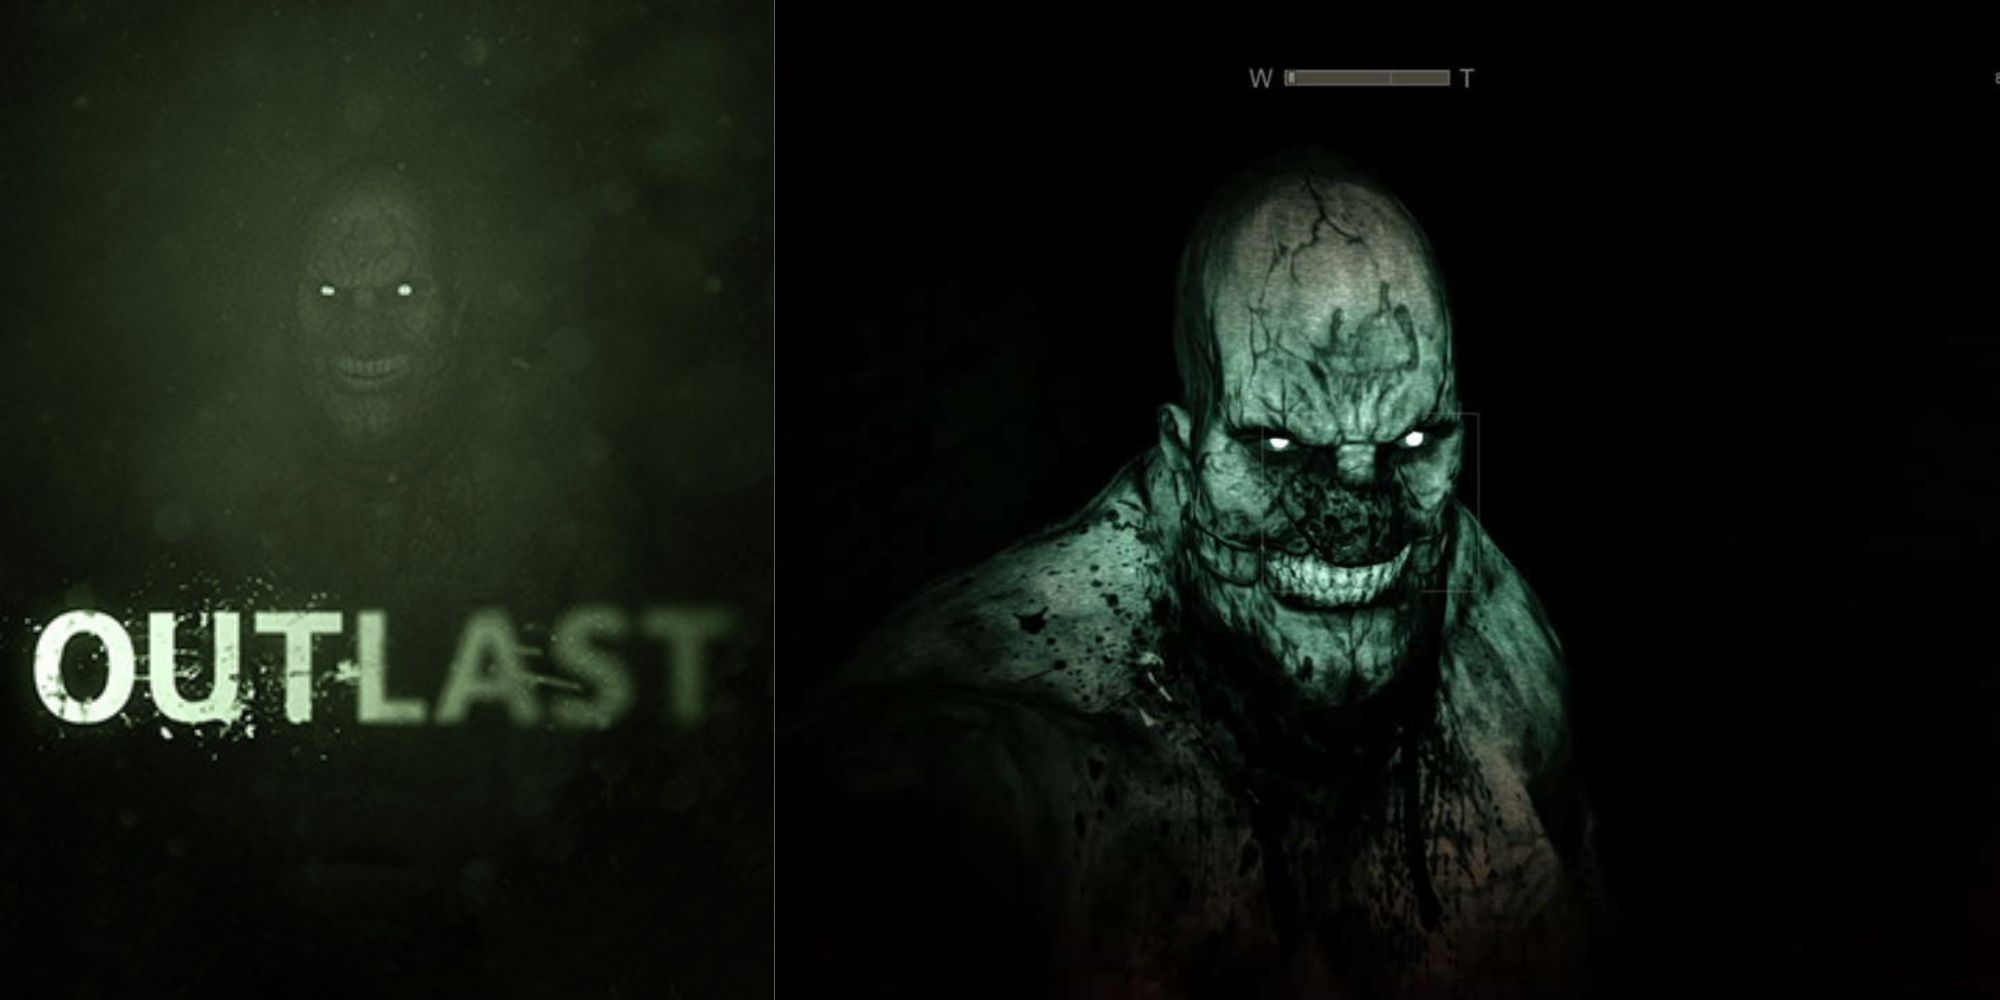 Outlast cover art with image of monster